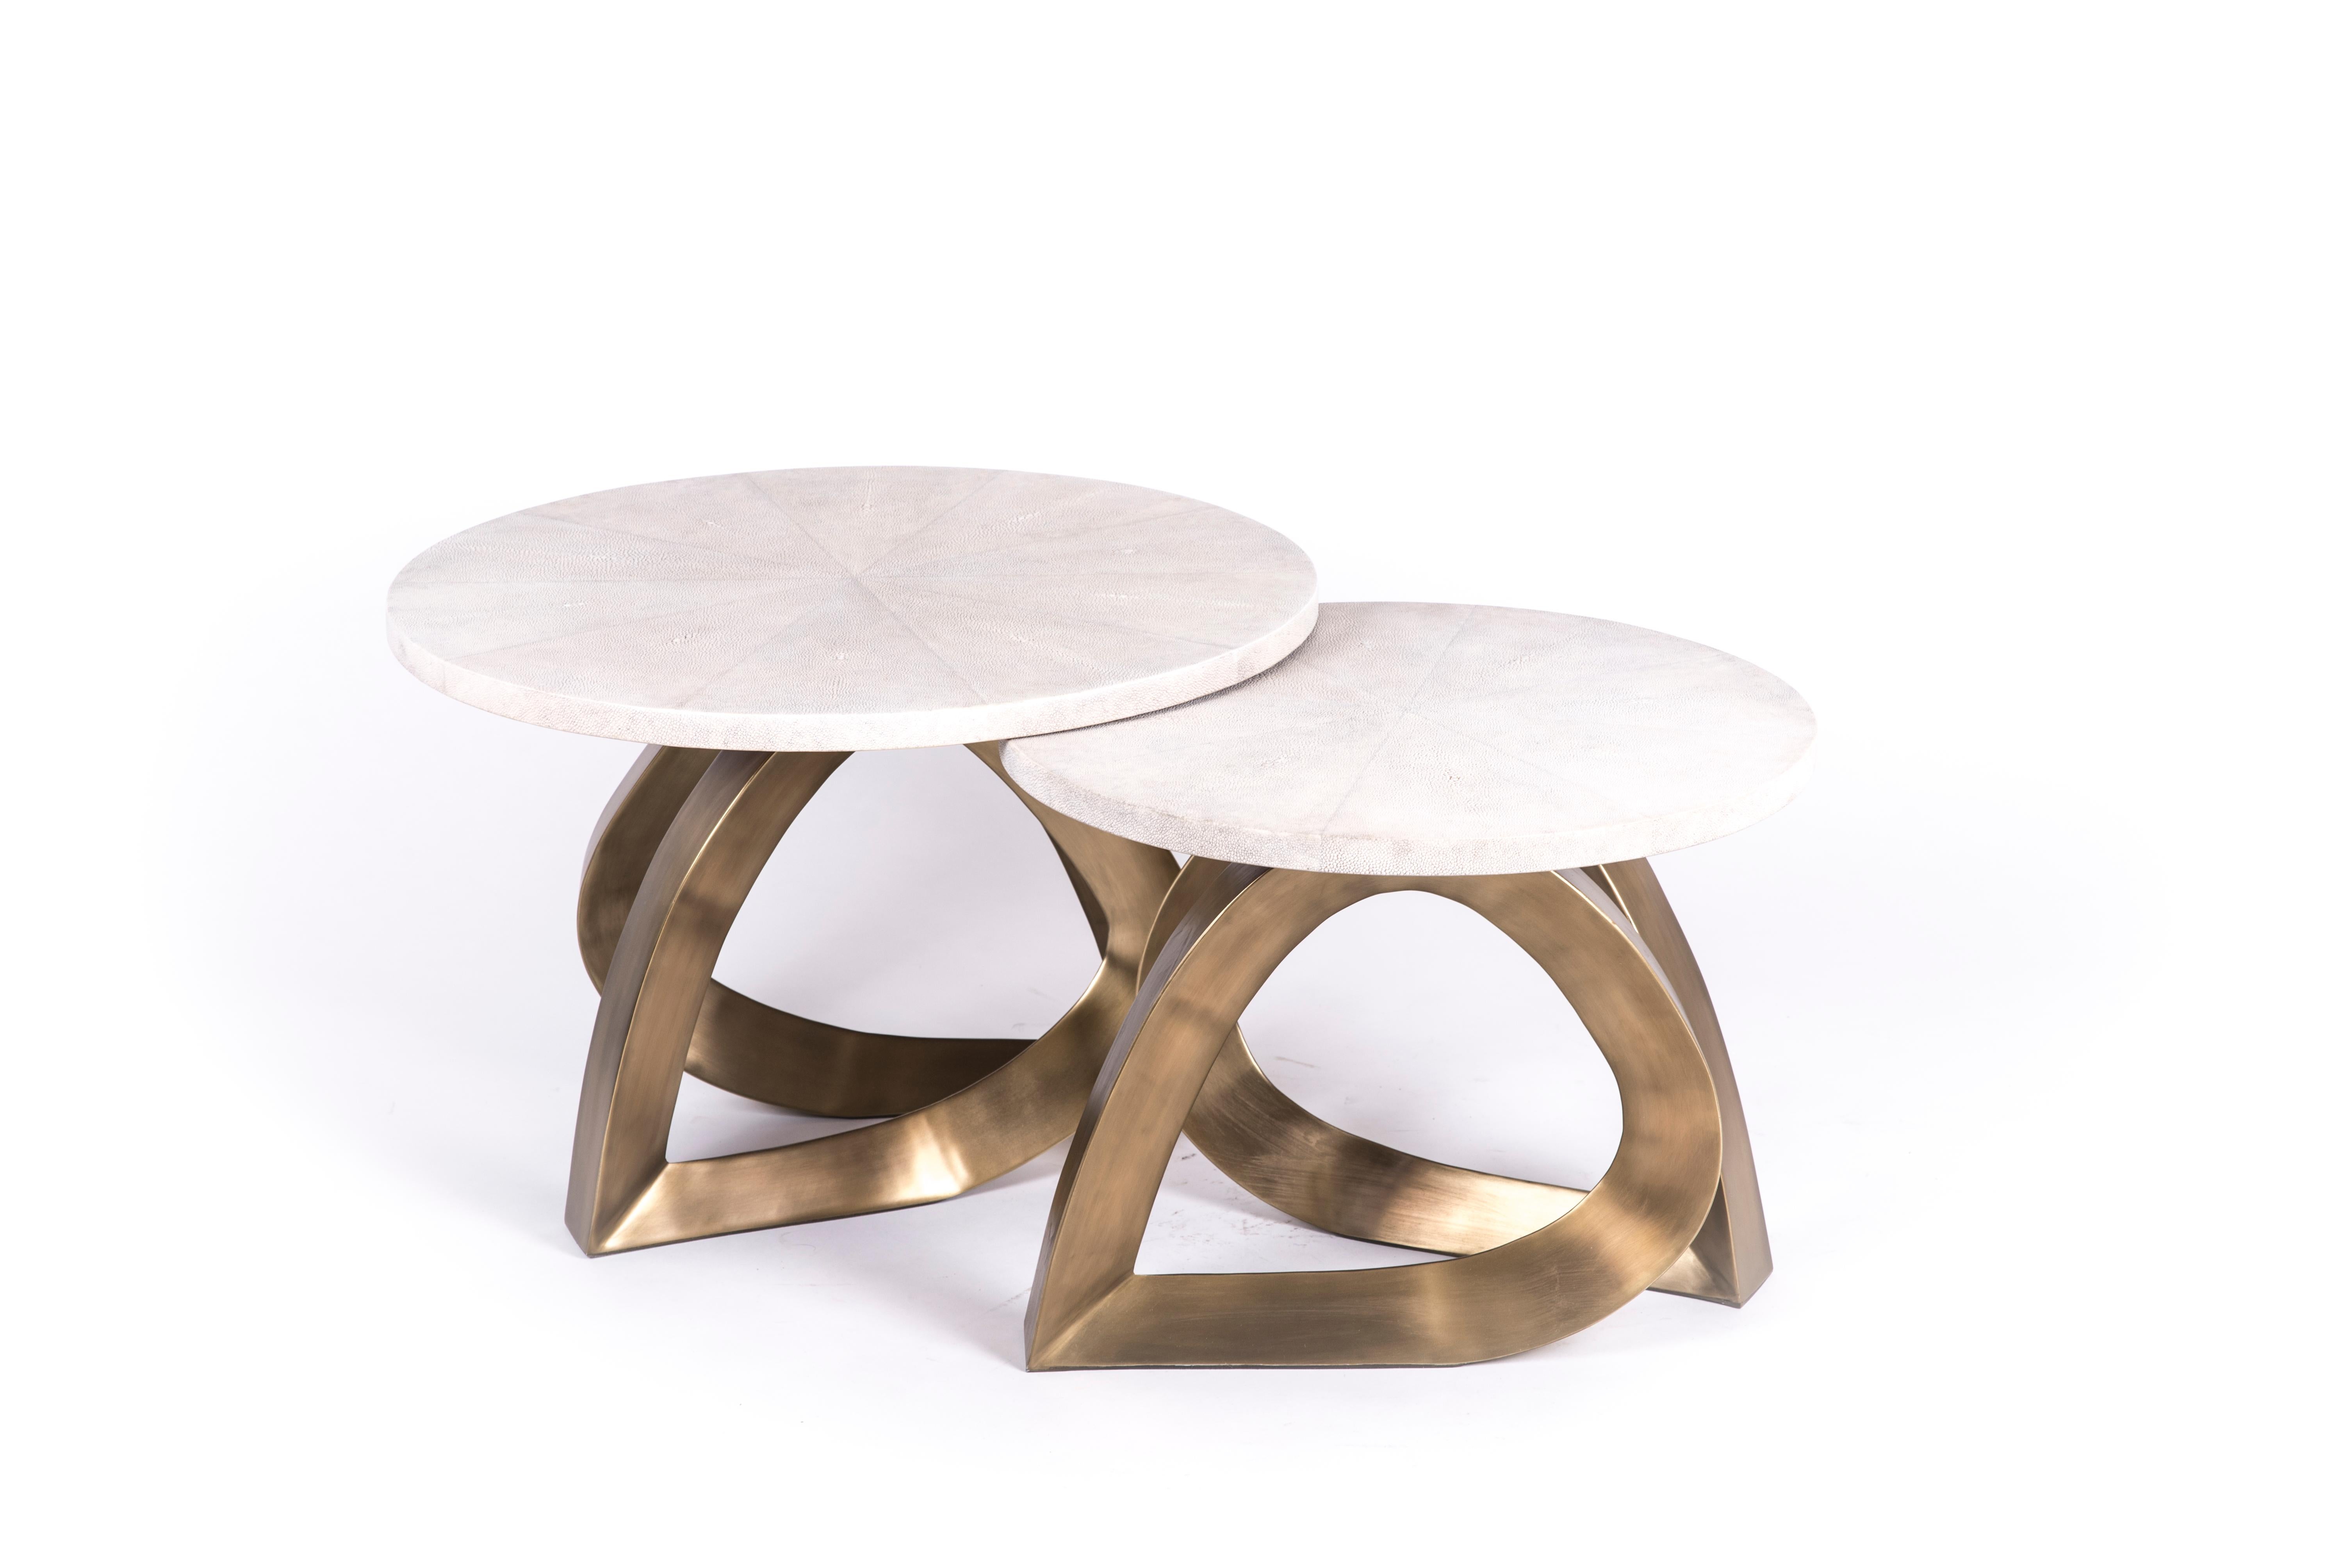 The set of 2 teardrop nesting coffee tables in cream shagreen and bronze-patina is an elegant design with circular top that sits on a sculptural base. The sculptural base is inlaid in bronze-patina brass and the top is in cream shagreen. These